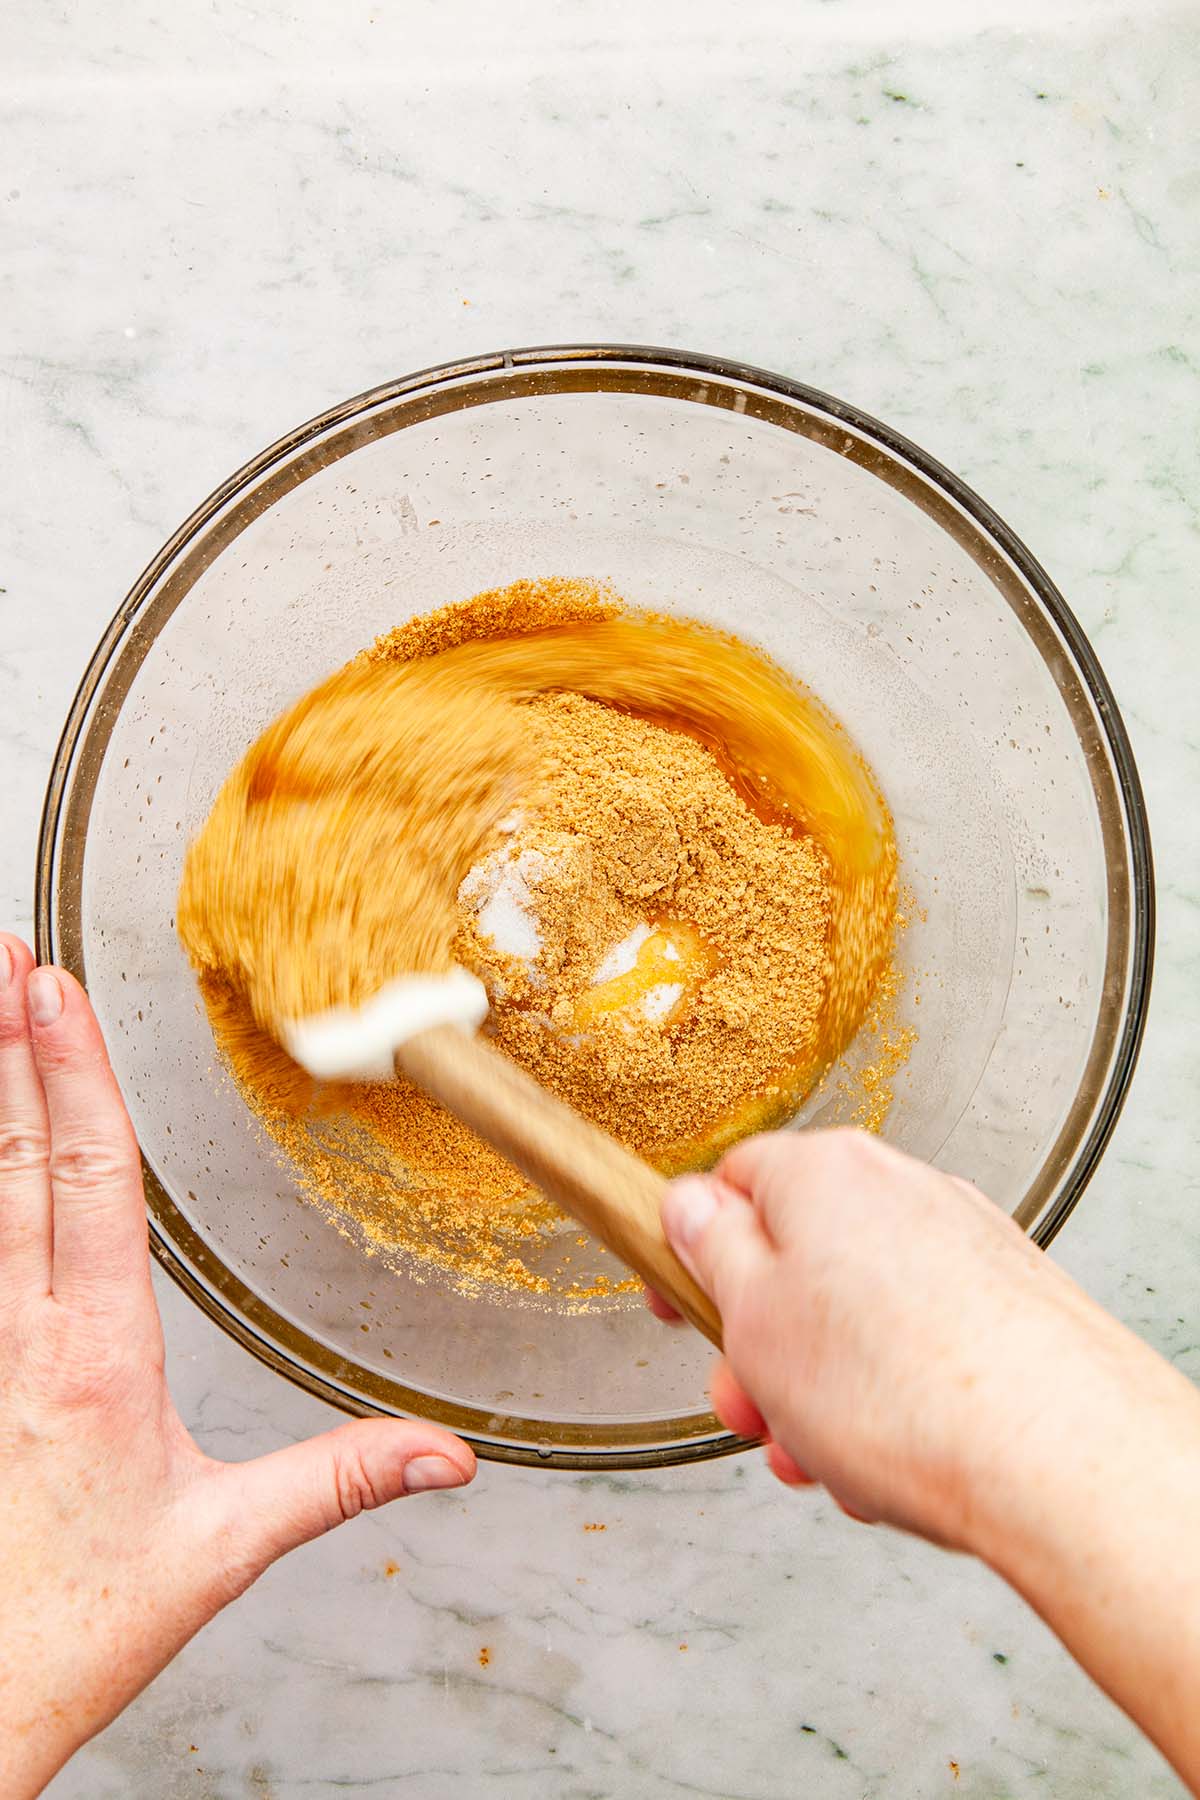 A hand mixing graham crust ingredients with a rubber spatula.